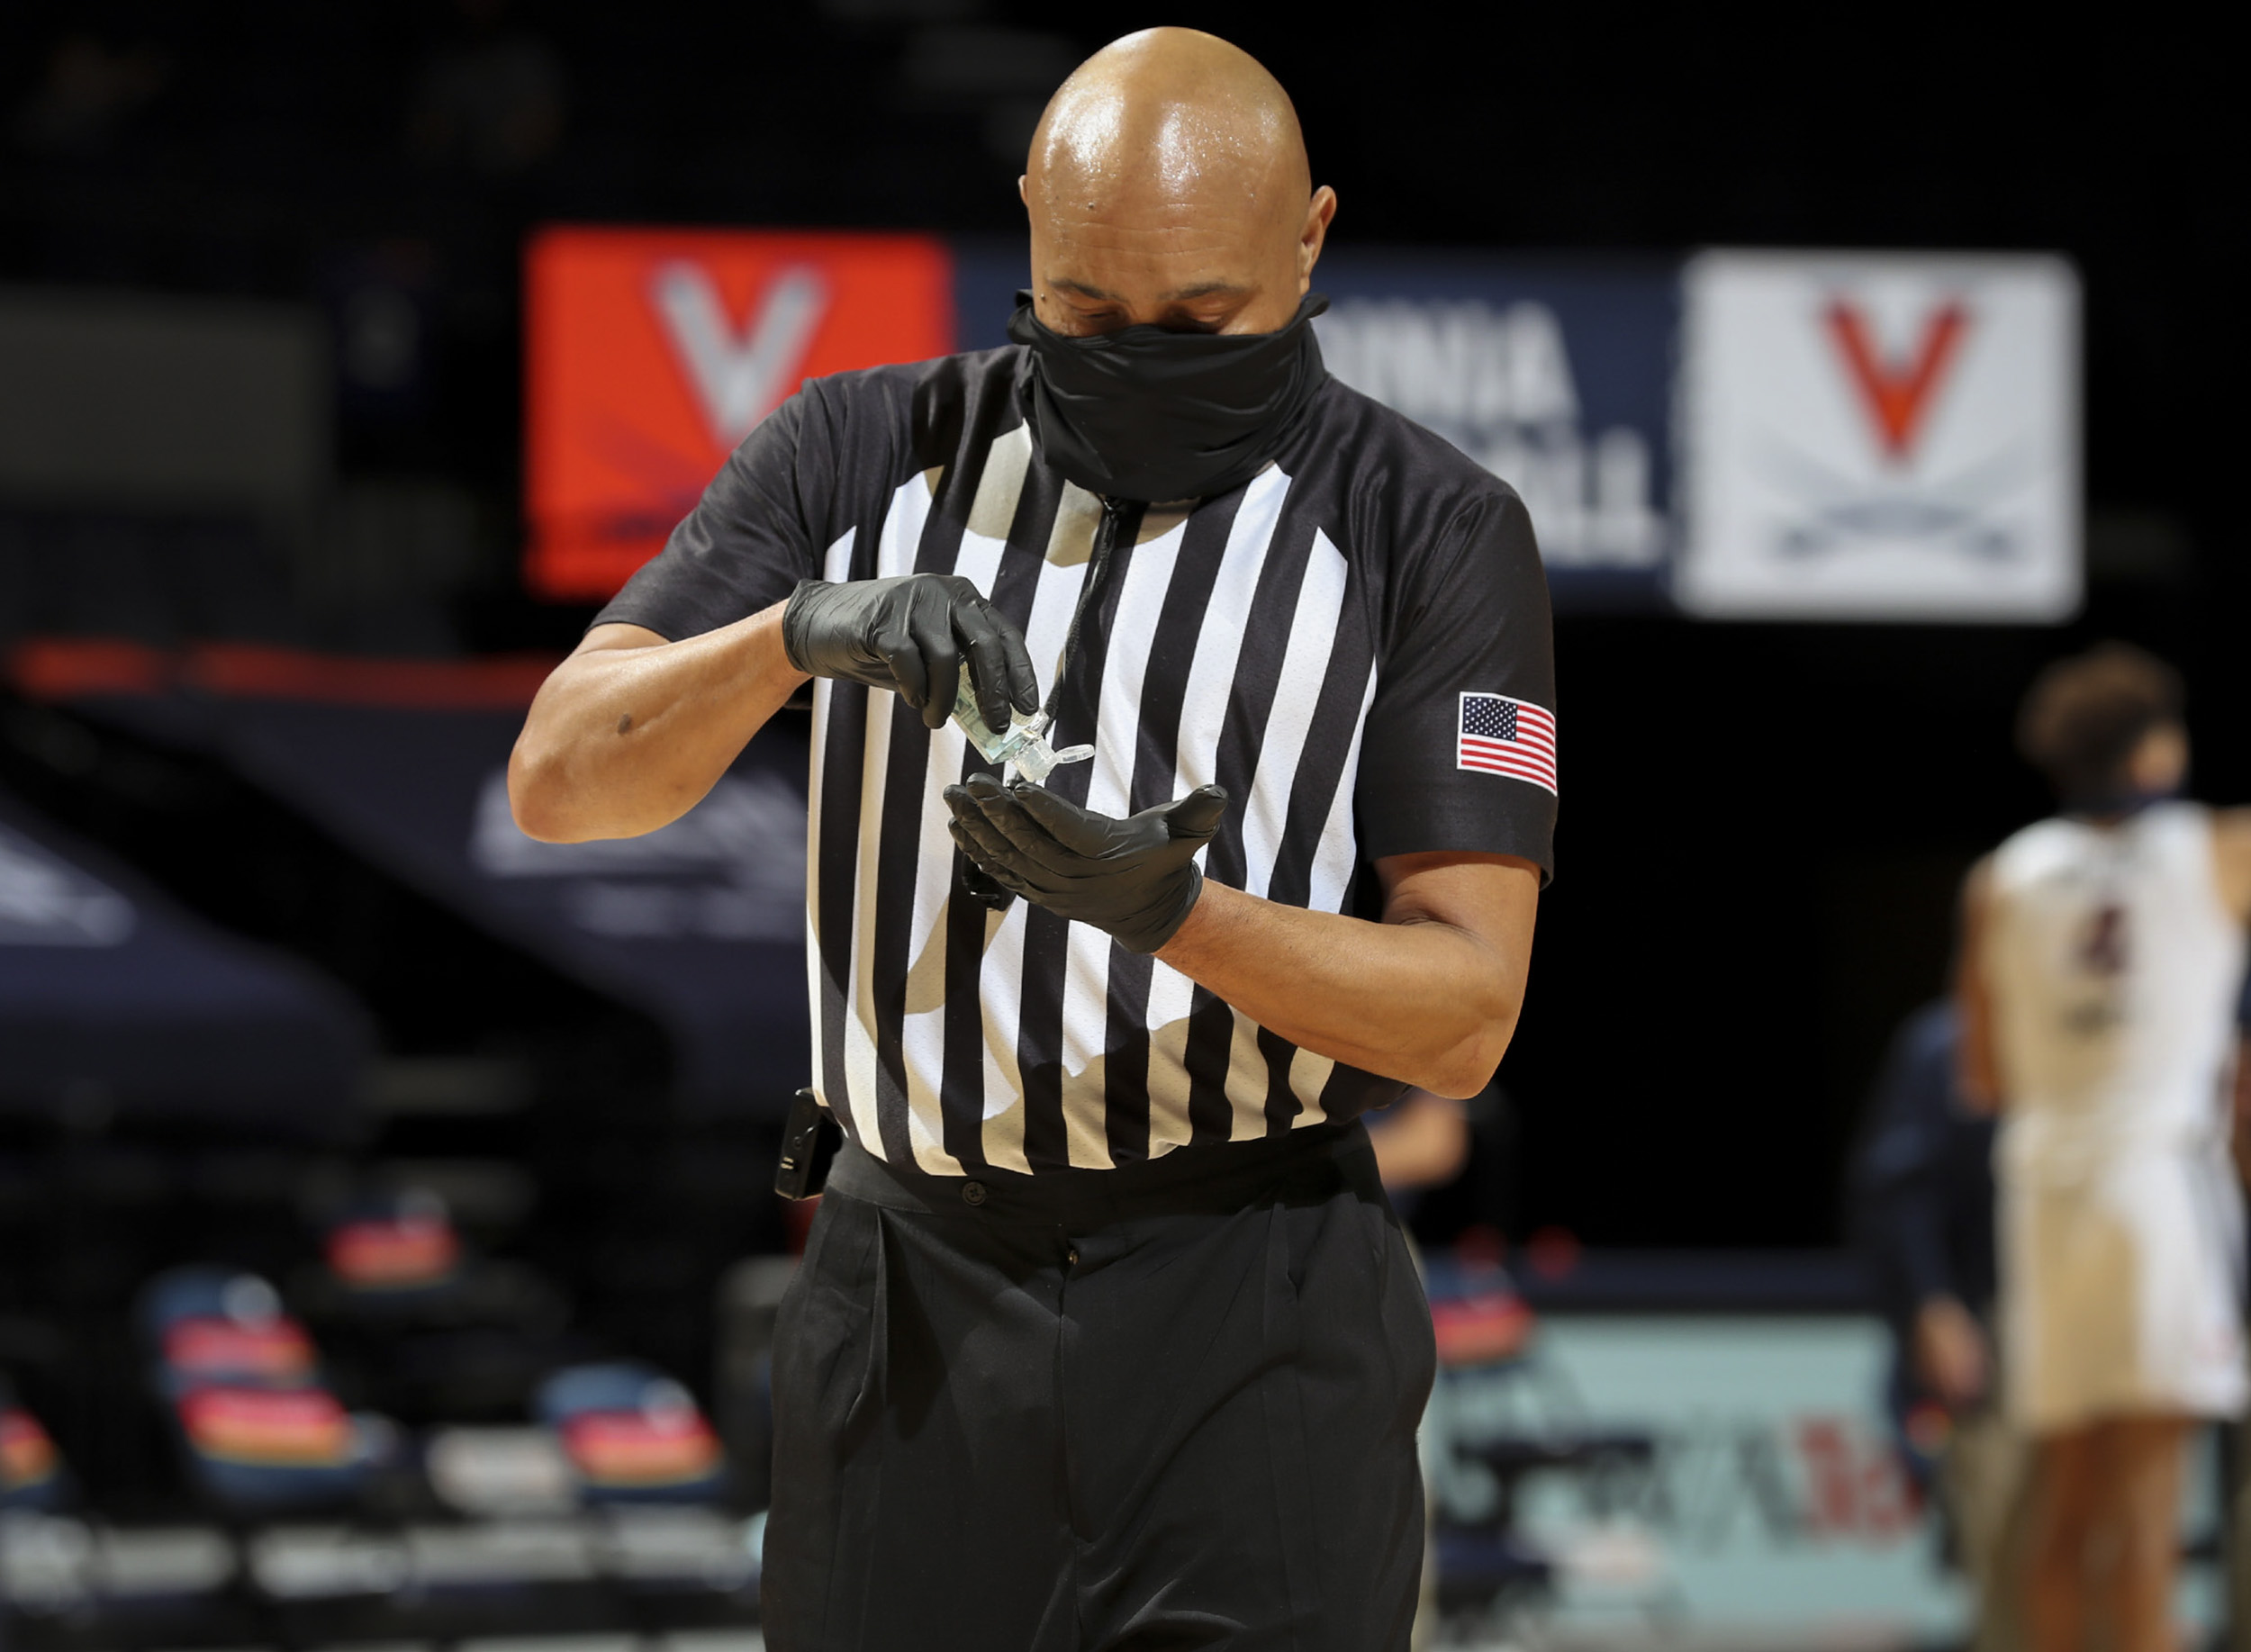 Basketball Referee sanitizing his gloves with hand sanitizer